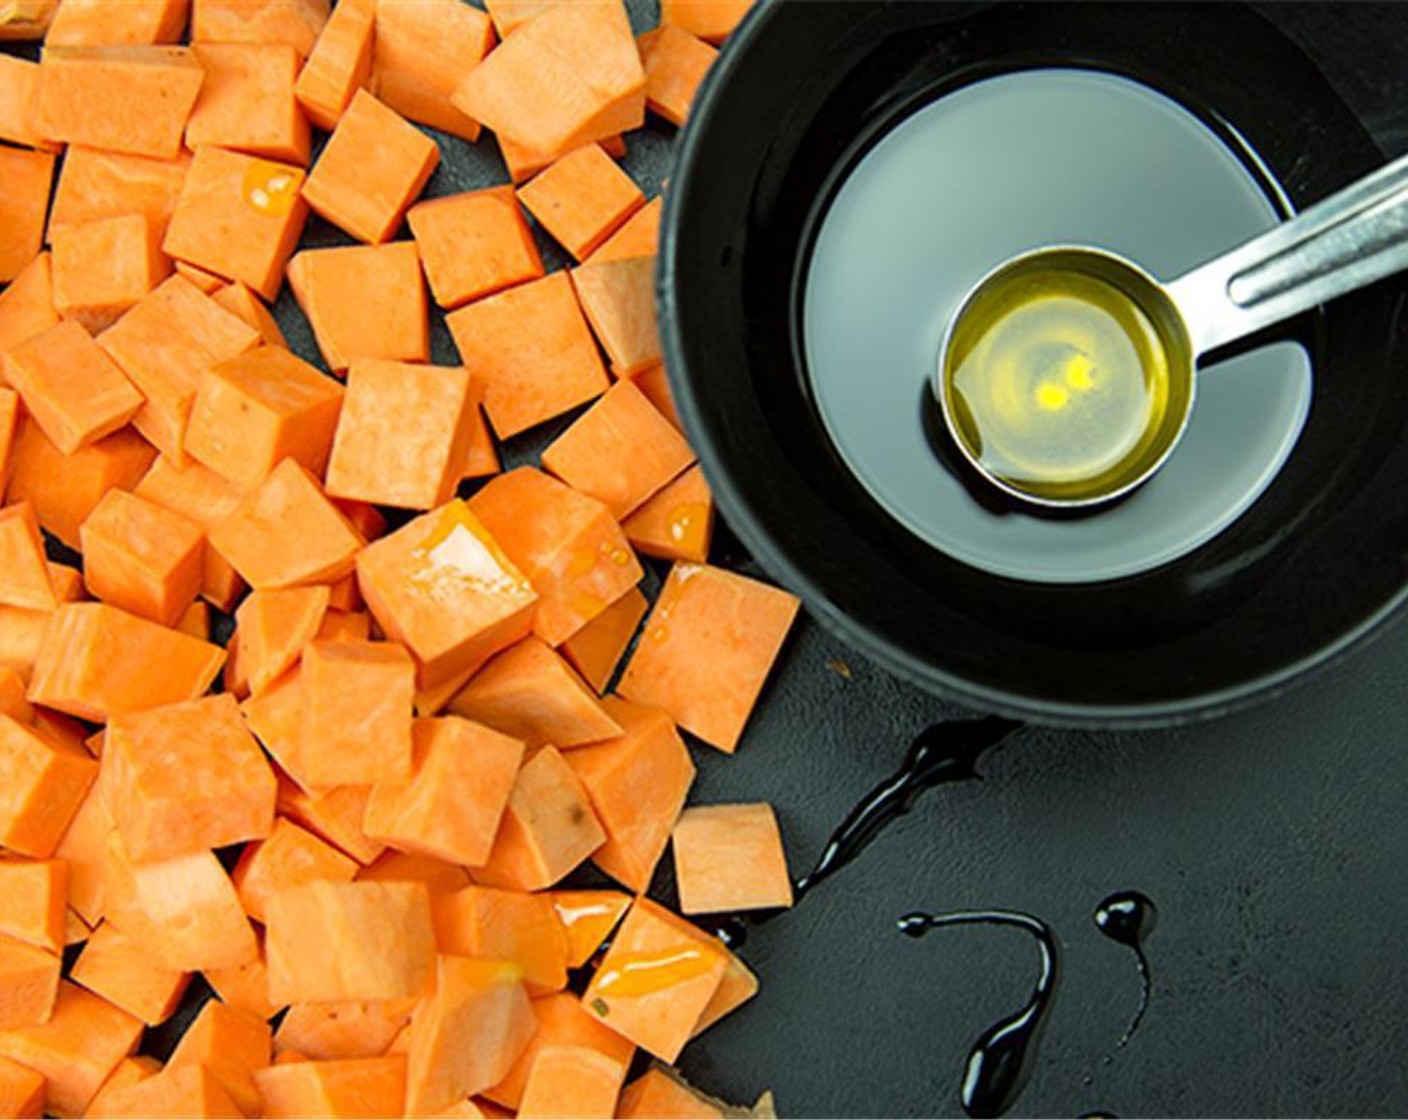 step 2 Place the sweet potato chunks into a mixing bowl. Drizzle with Olive Oil (3 Tbsp).